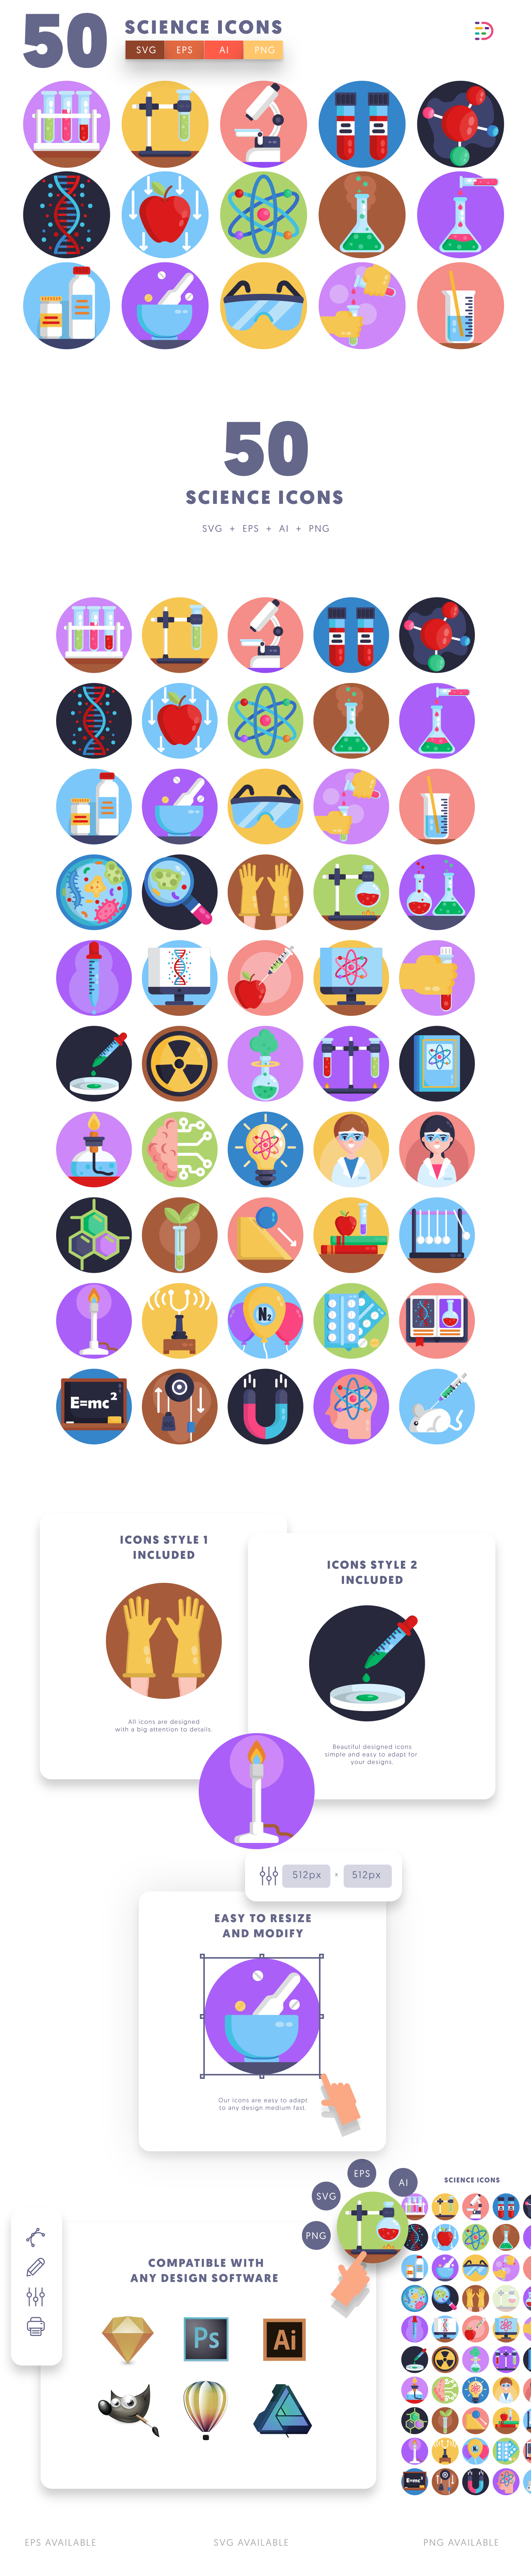 Science icons info graphic